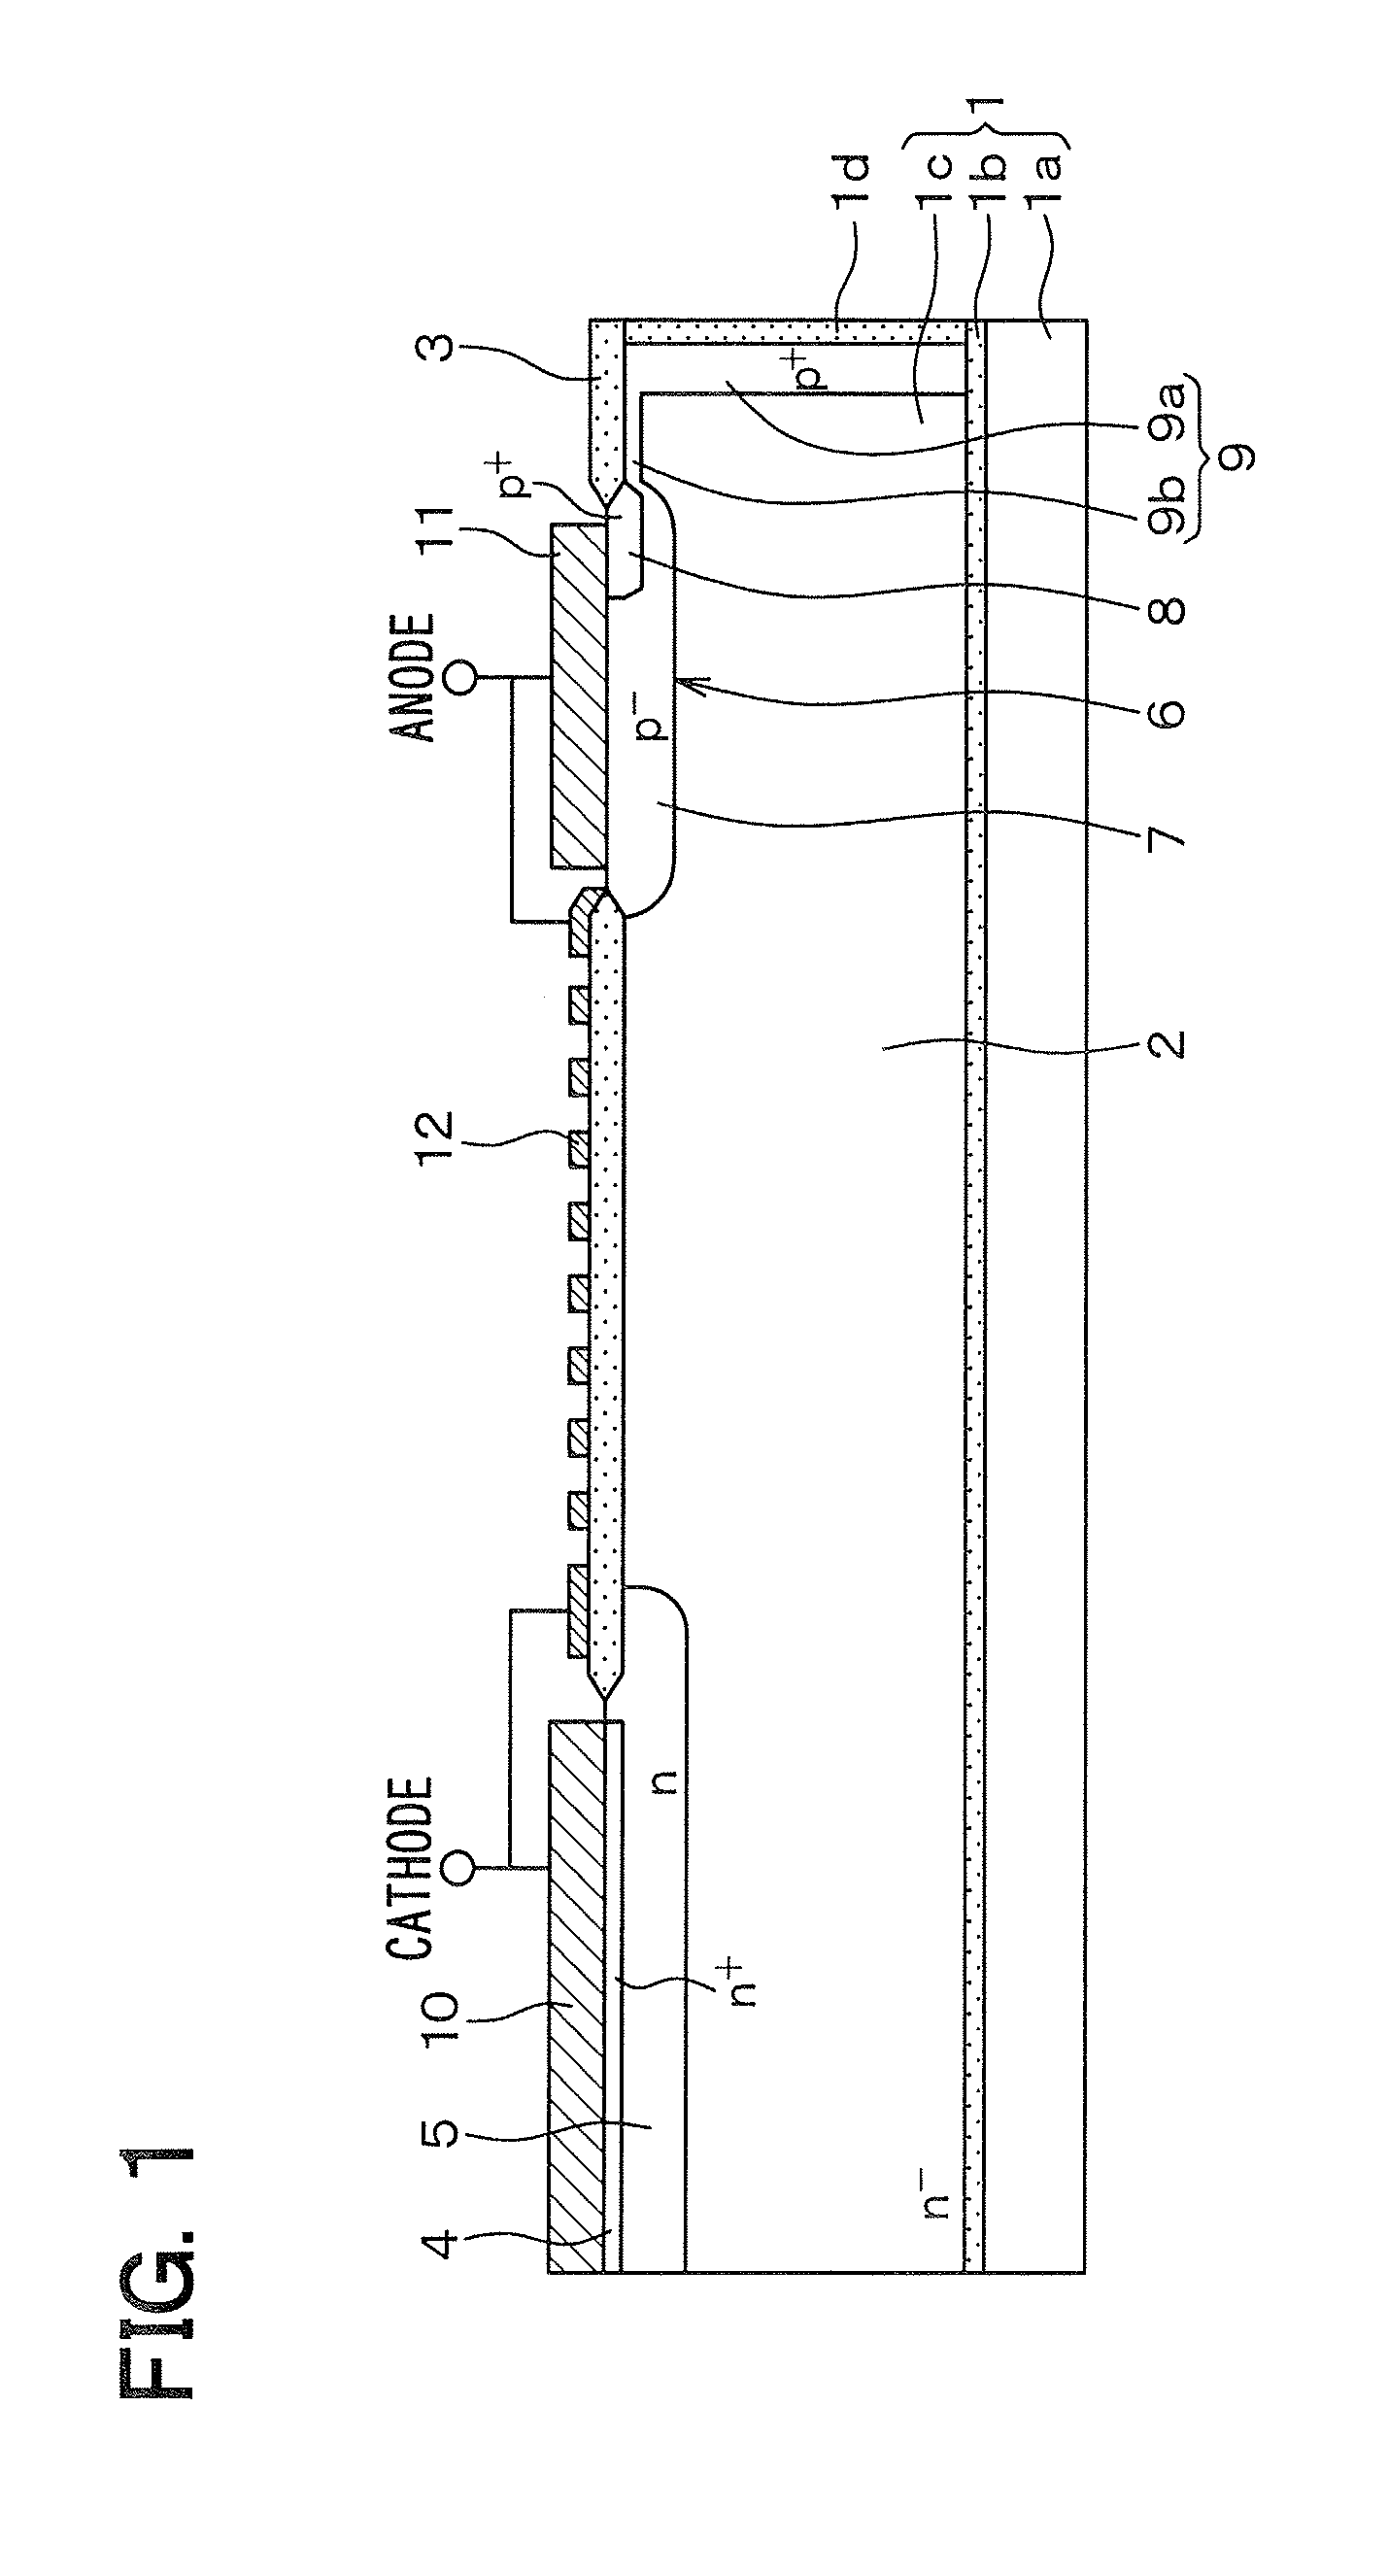 Semiconductor device having lateral diode